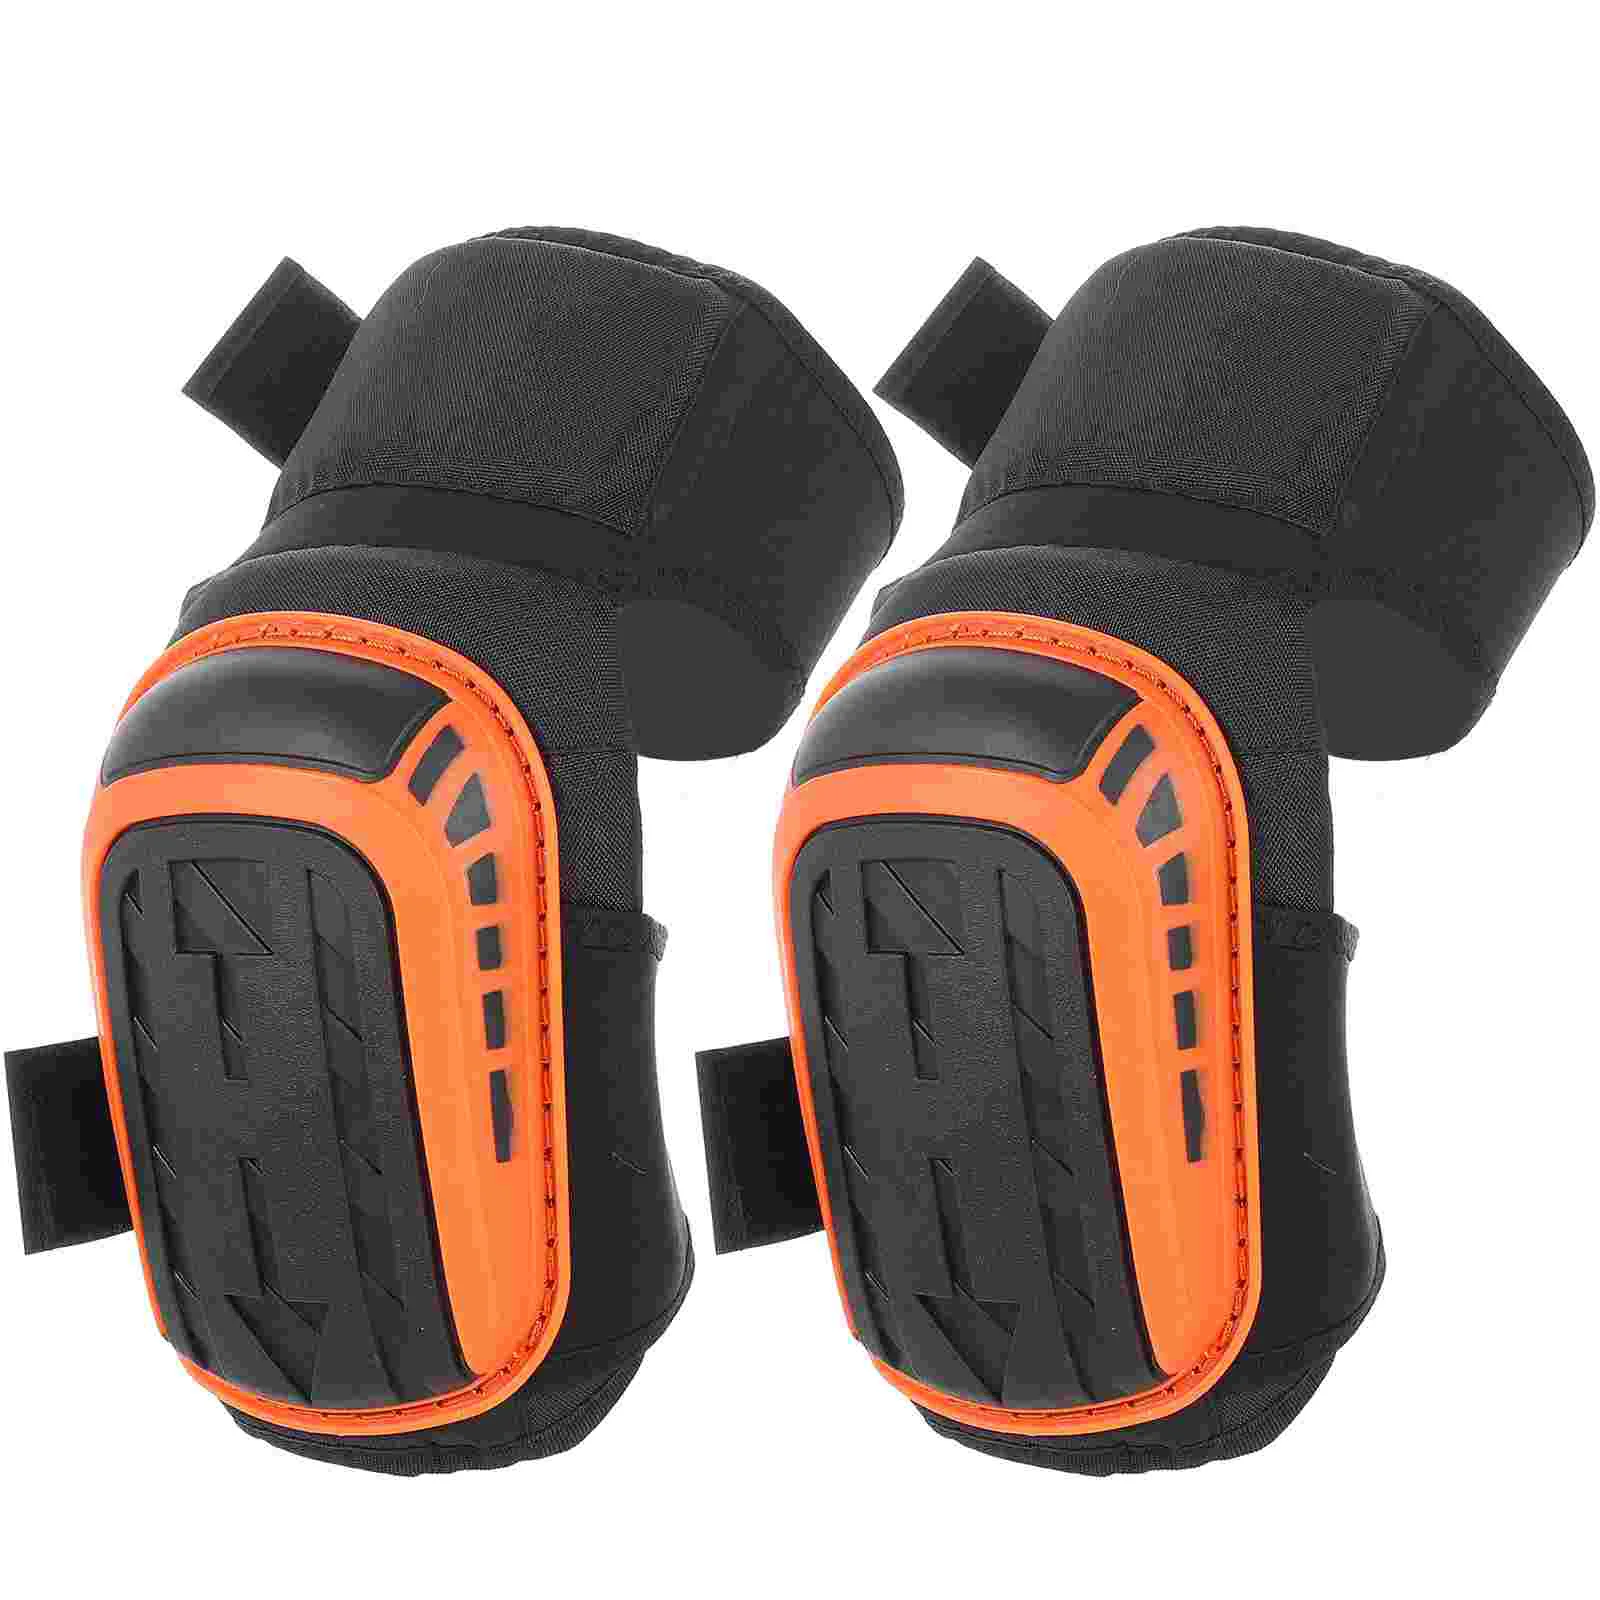 

Knee Pads Work Pad Tile Brace Tilers Elbow Support Gear Construction Outdoor Sleeve Kneeling Setter Place Mason Riding Tendon